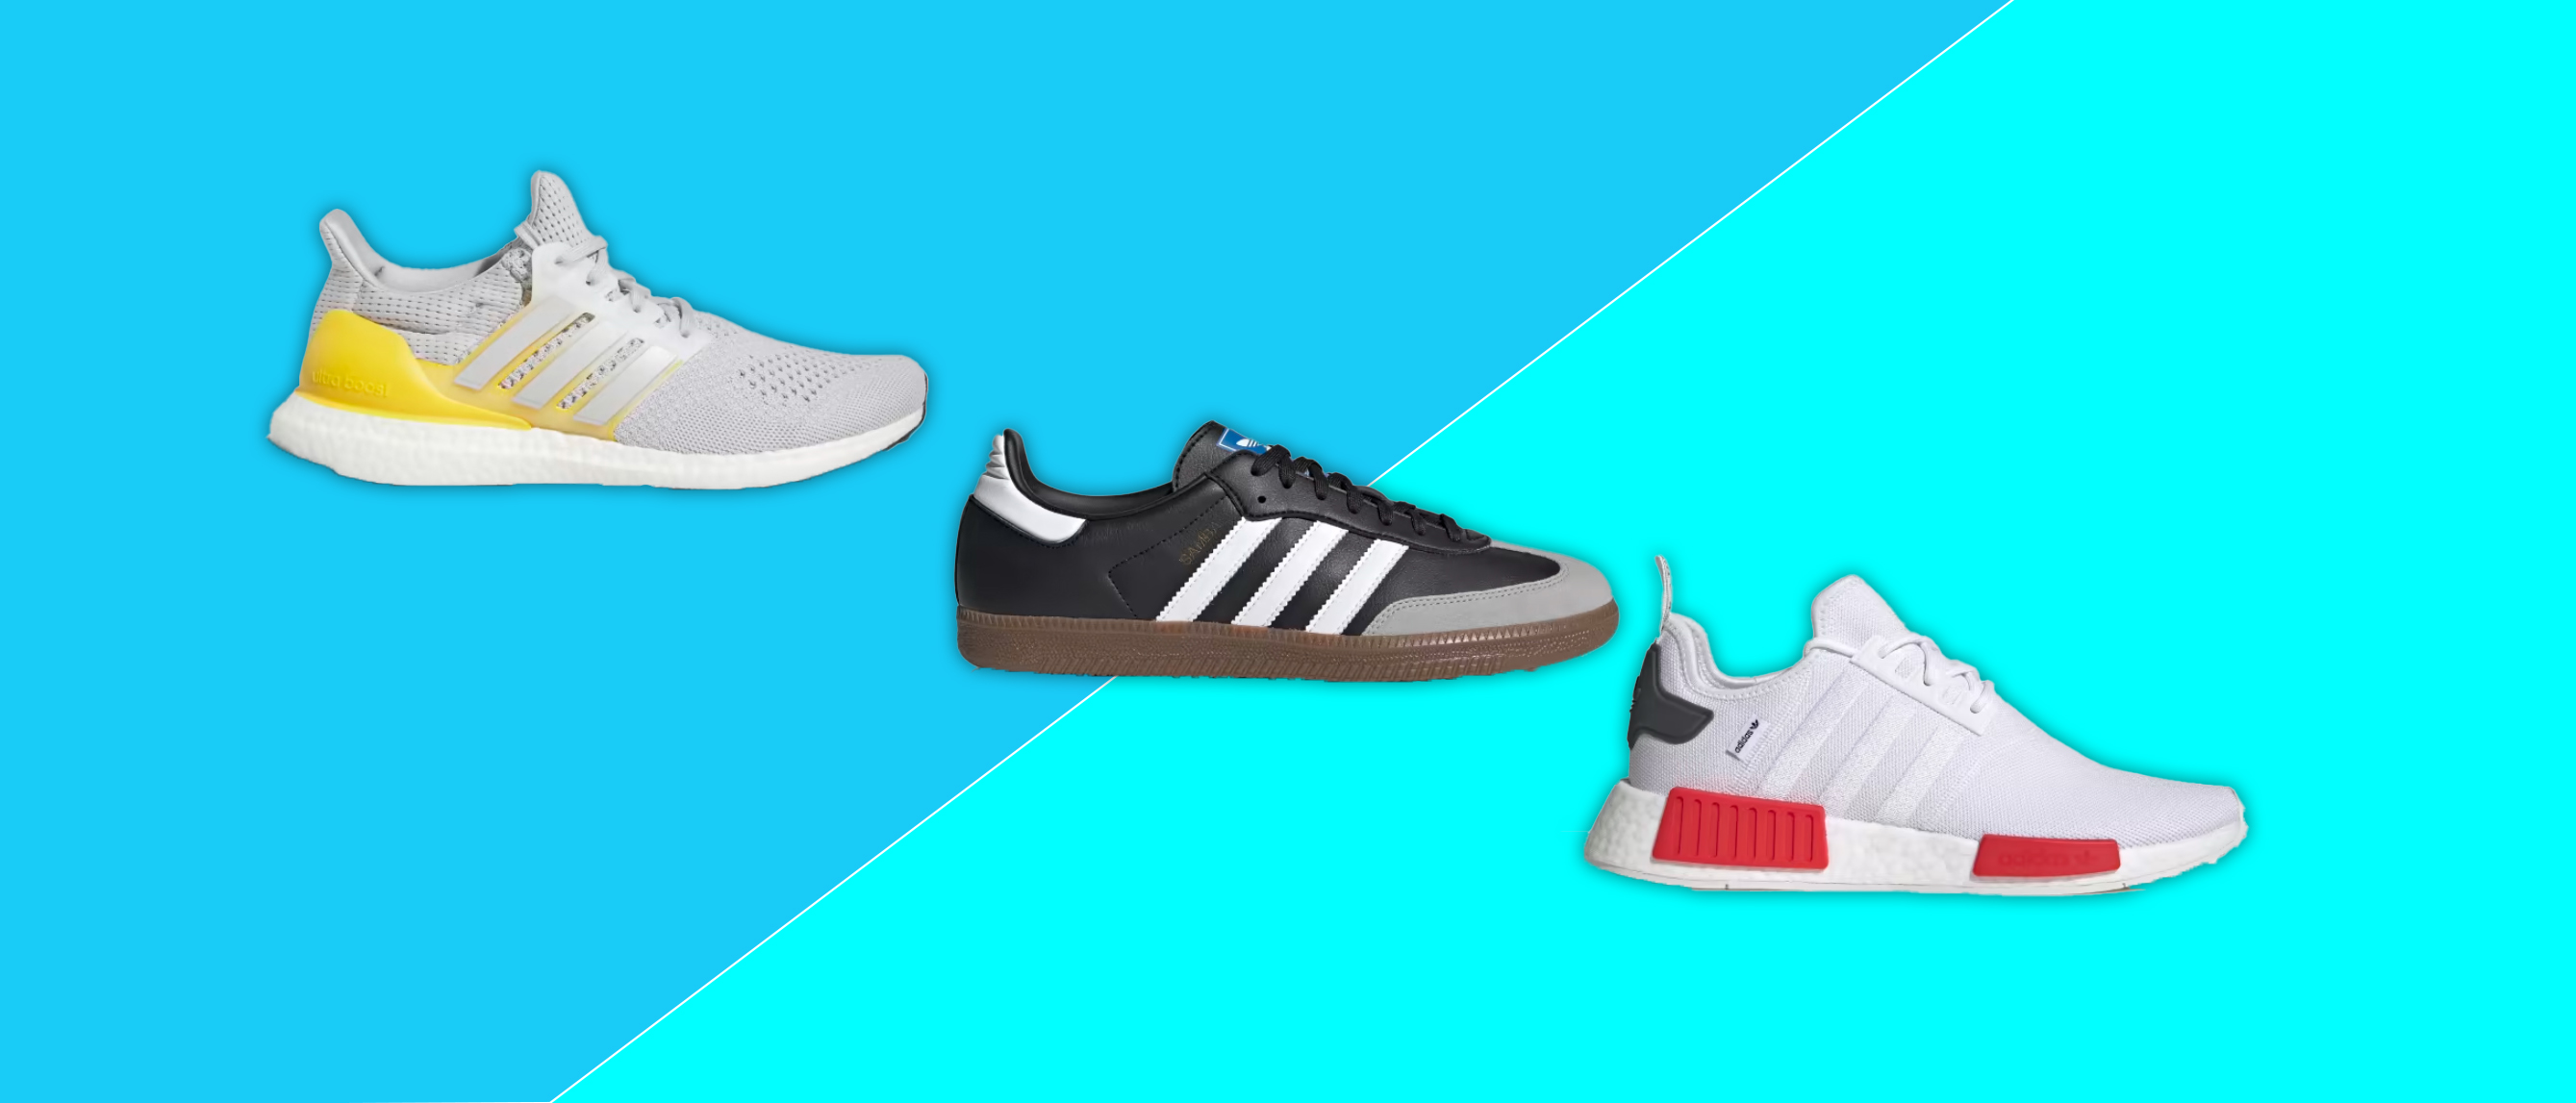 Collage of 3 adidas sneakers against a blue background